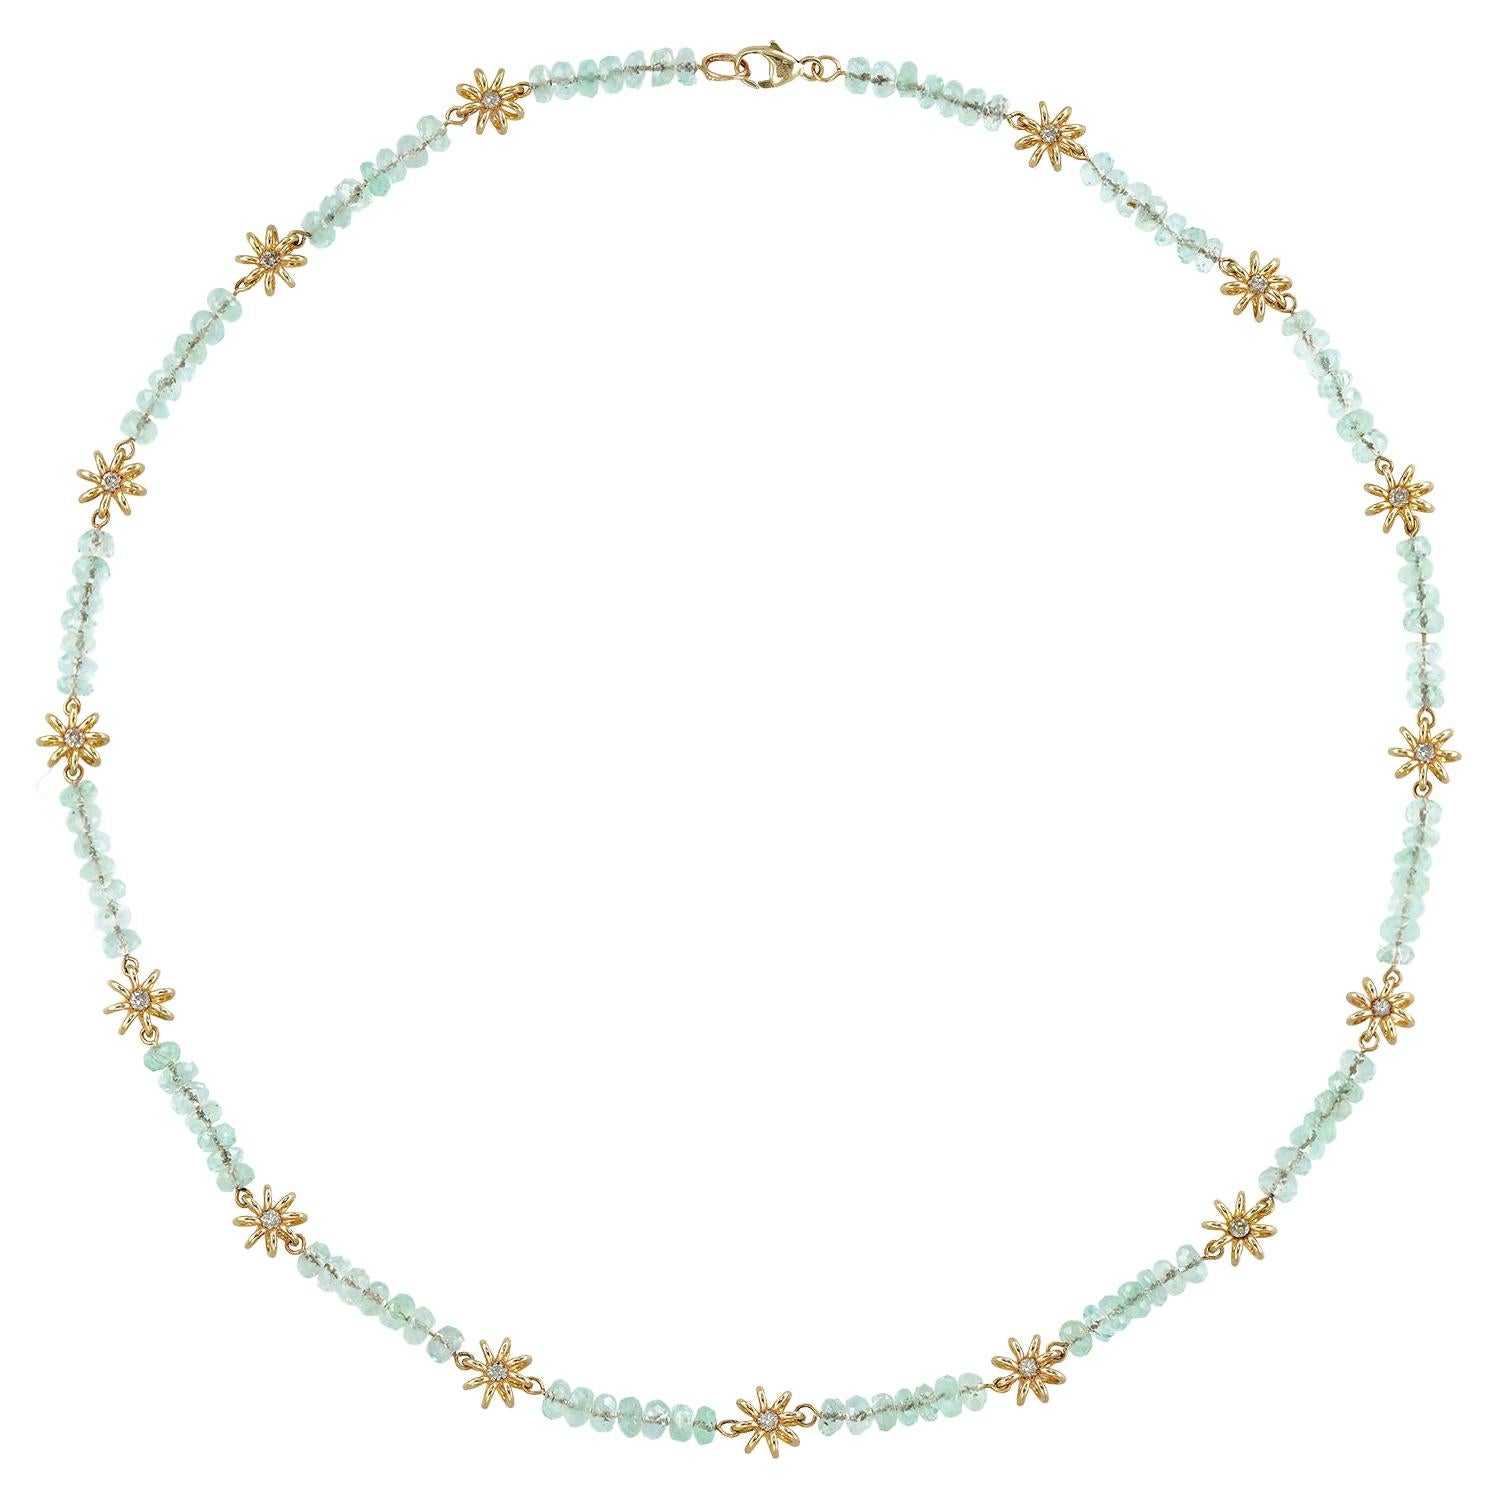 Gold and Green Beryl Necklace by Lucie Heskett-Brem For Sale